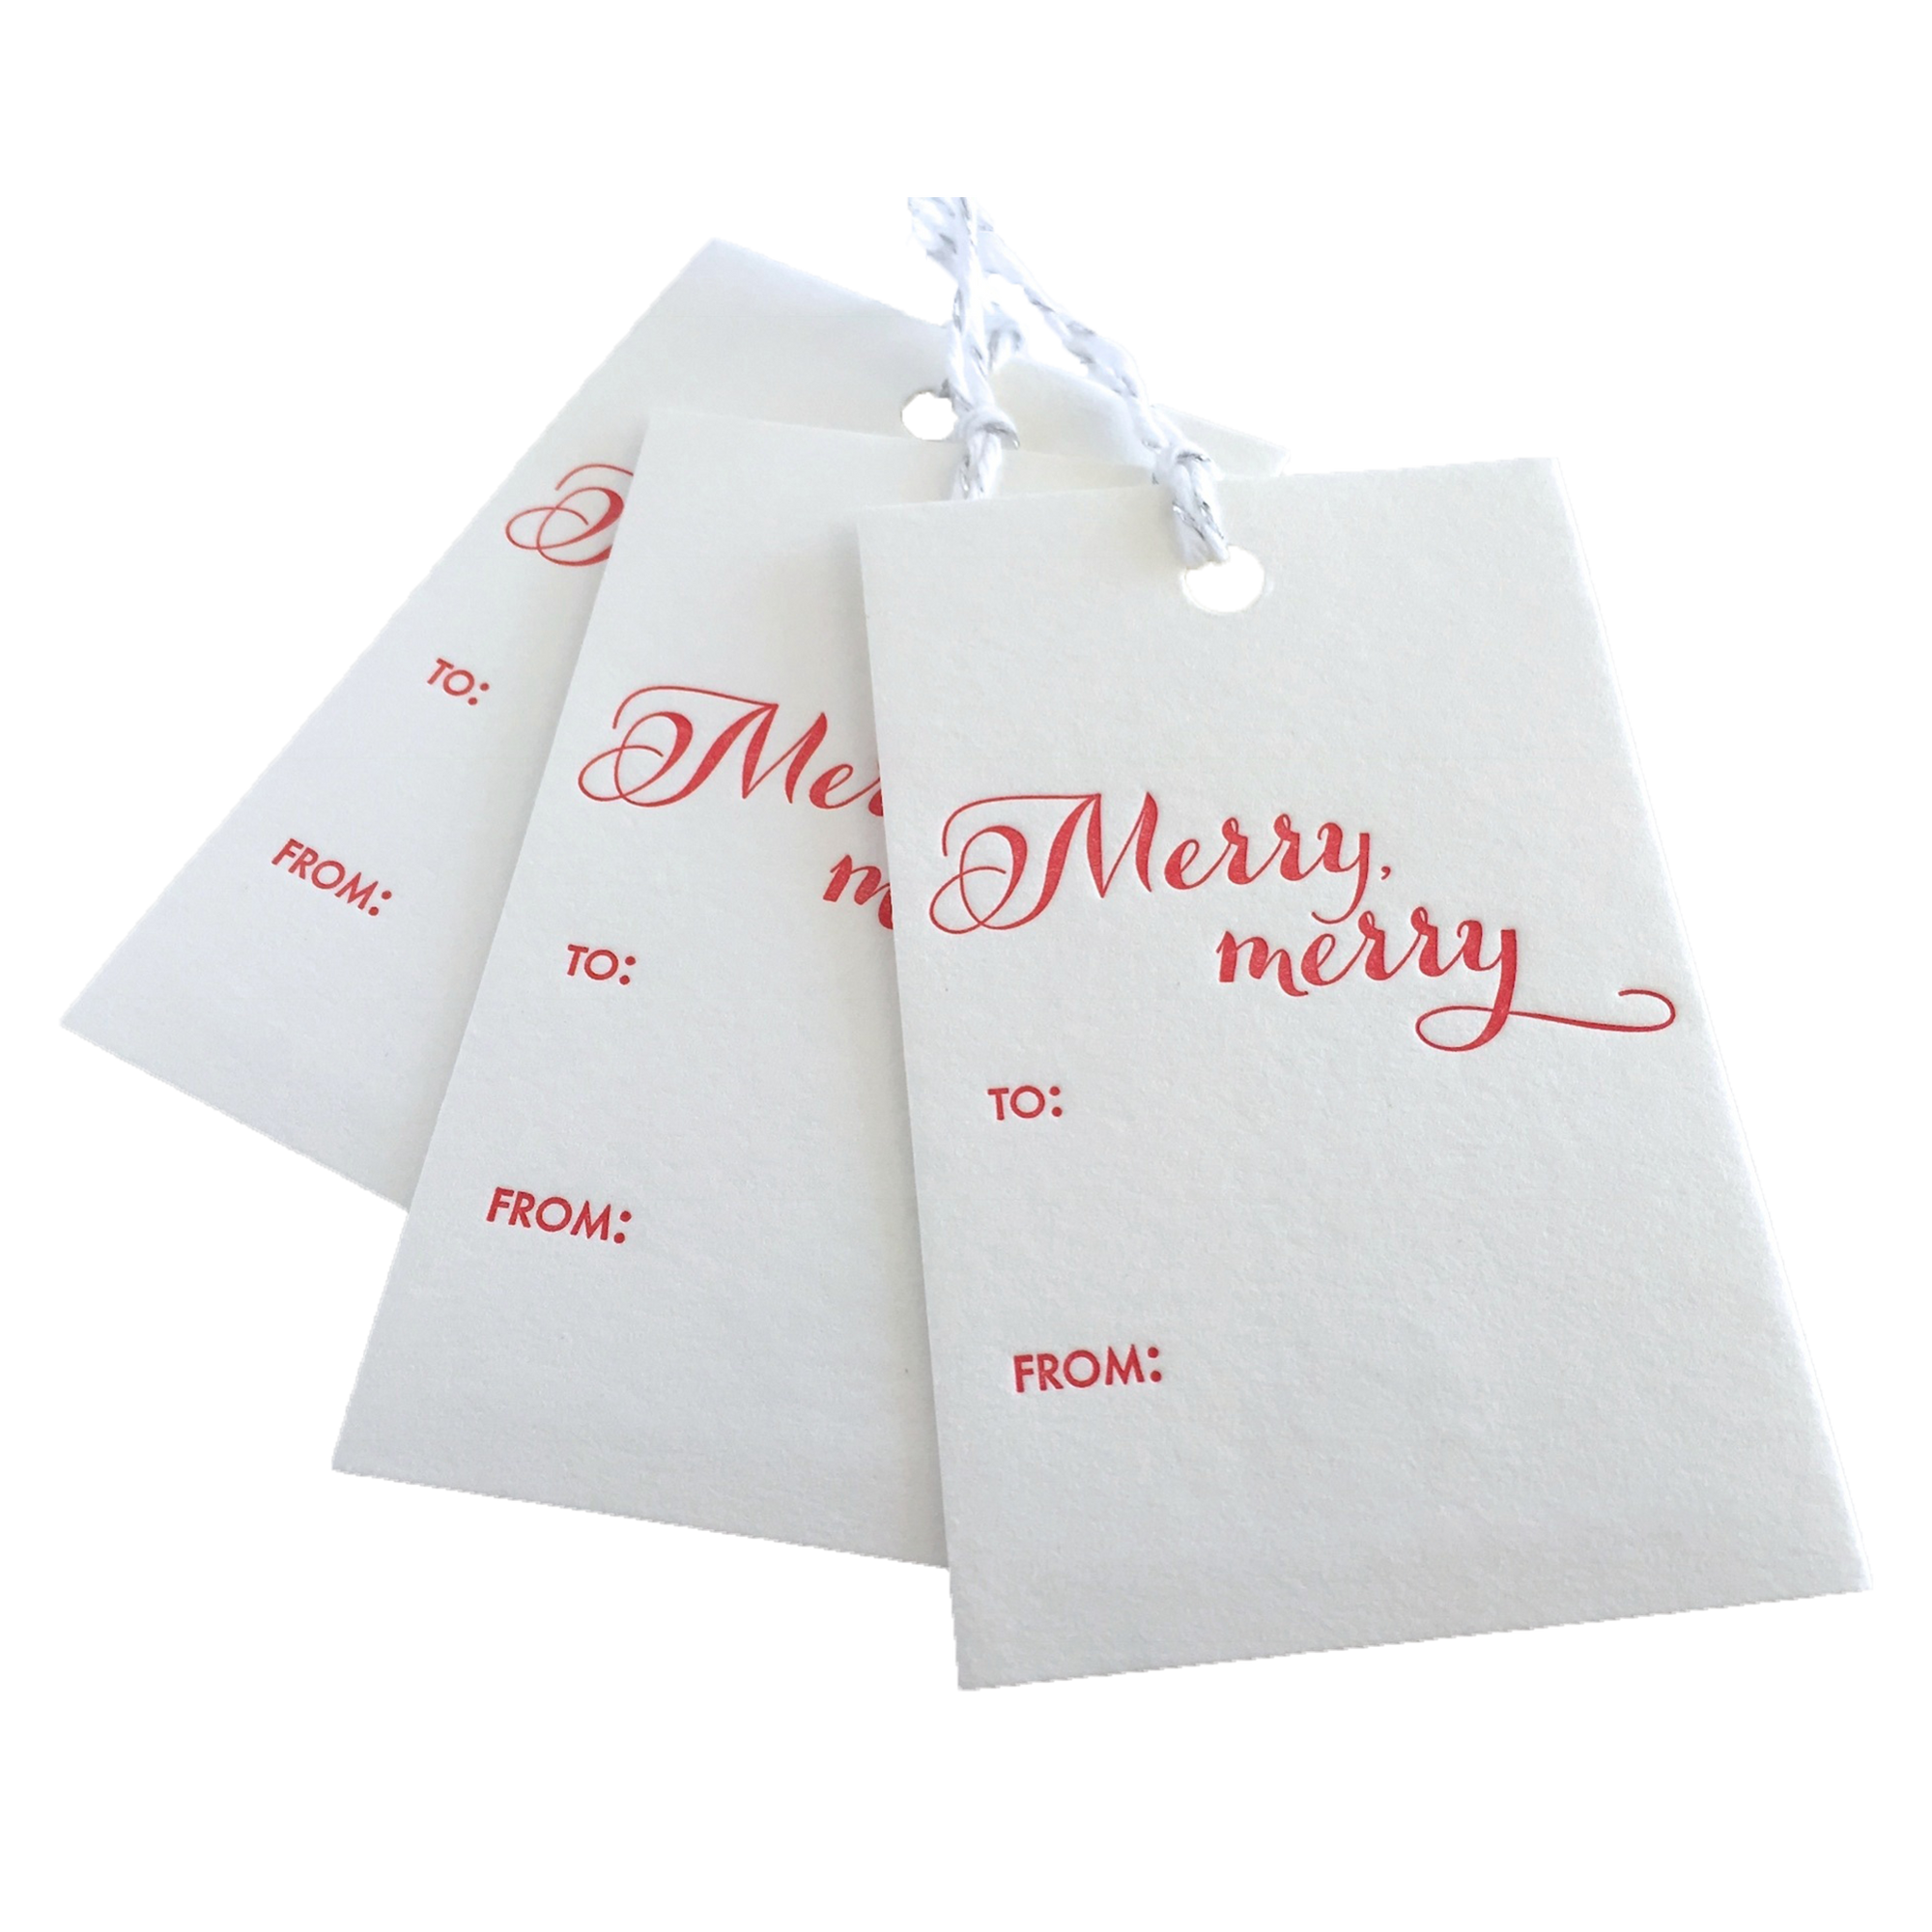 Merry Merry Gift Tags, Set of 6